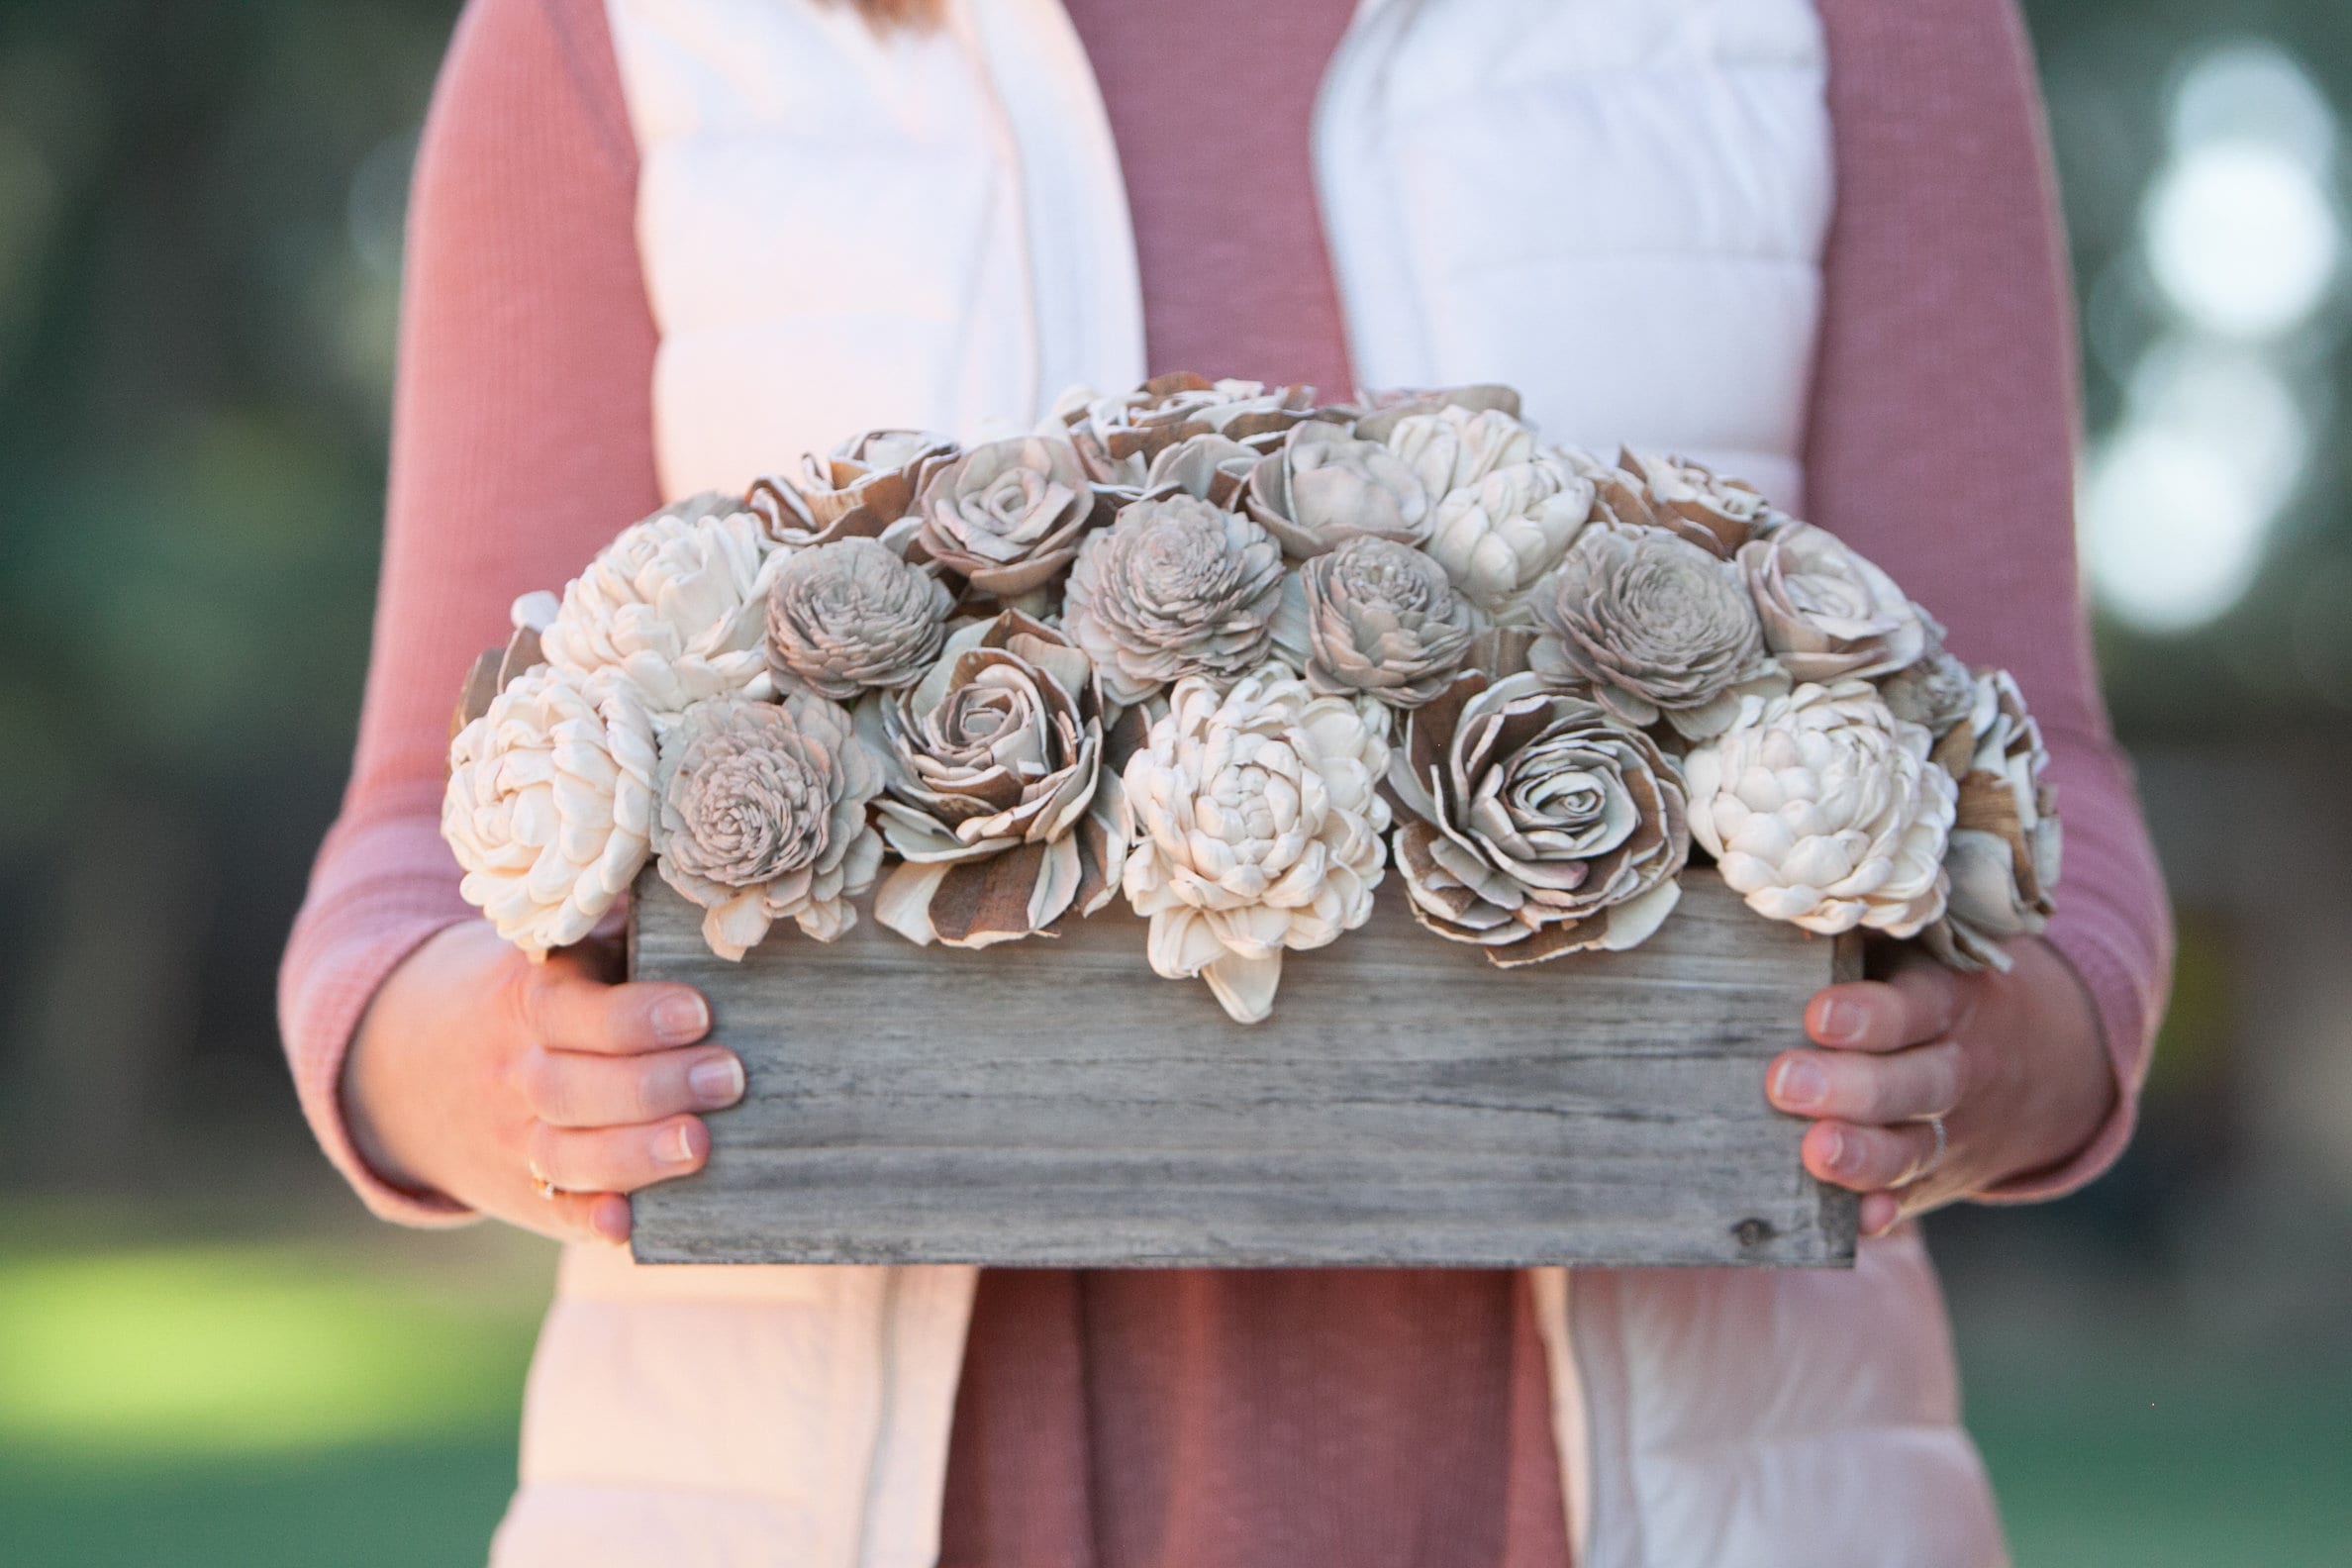 Ways to Incorporate Sola Wood Flowers Into Your Wedding Centerpieces